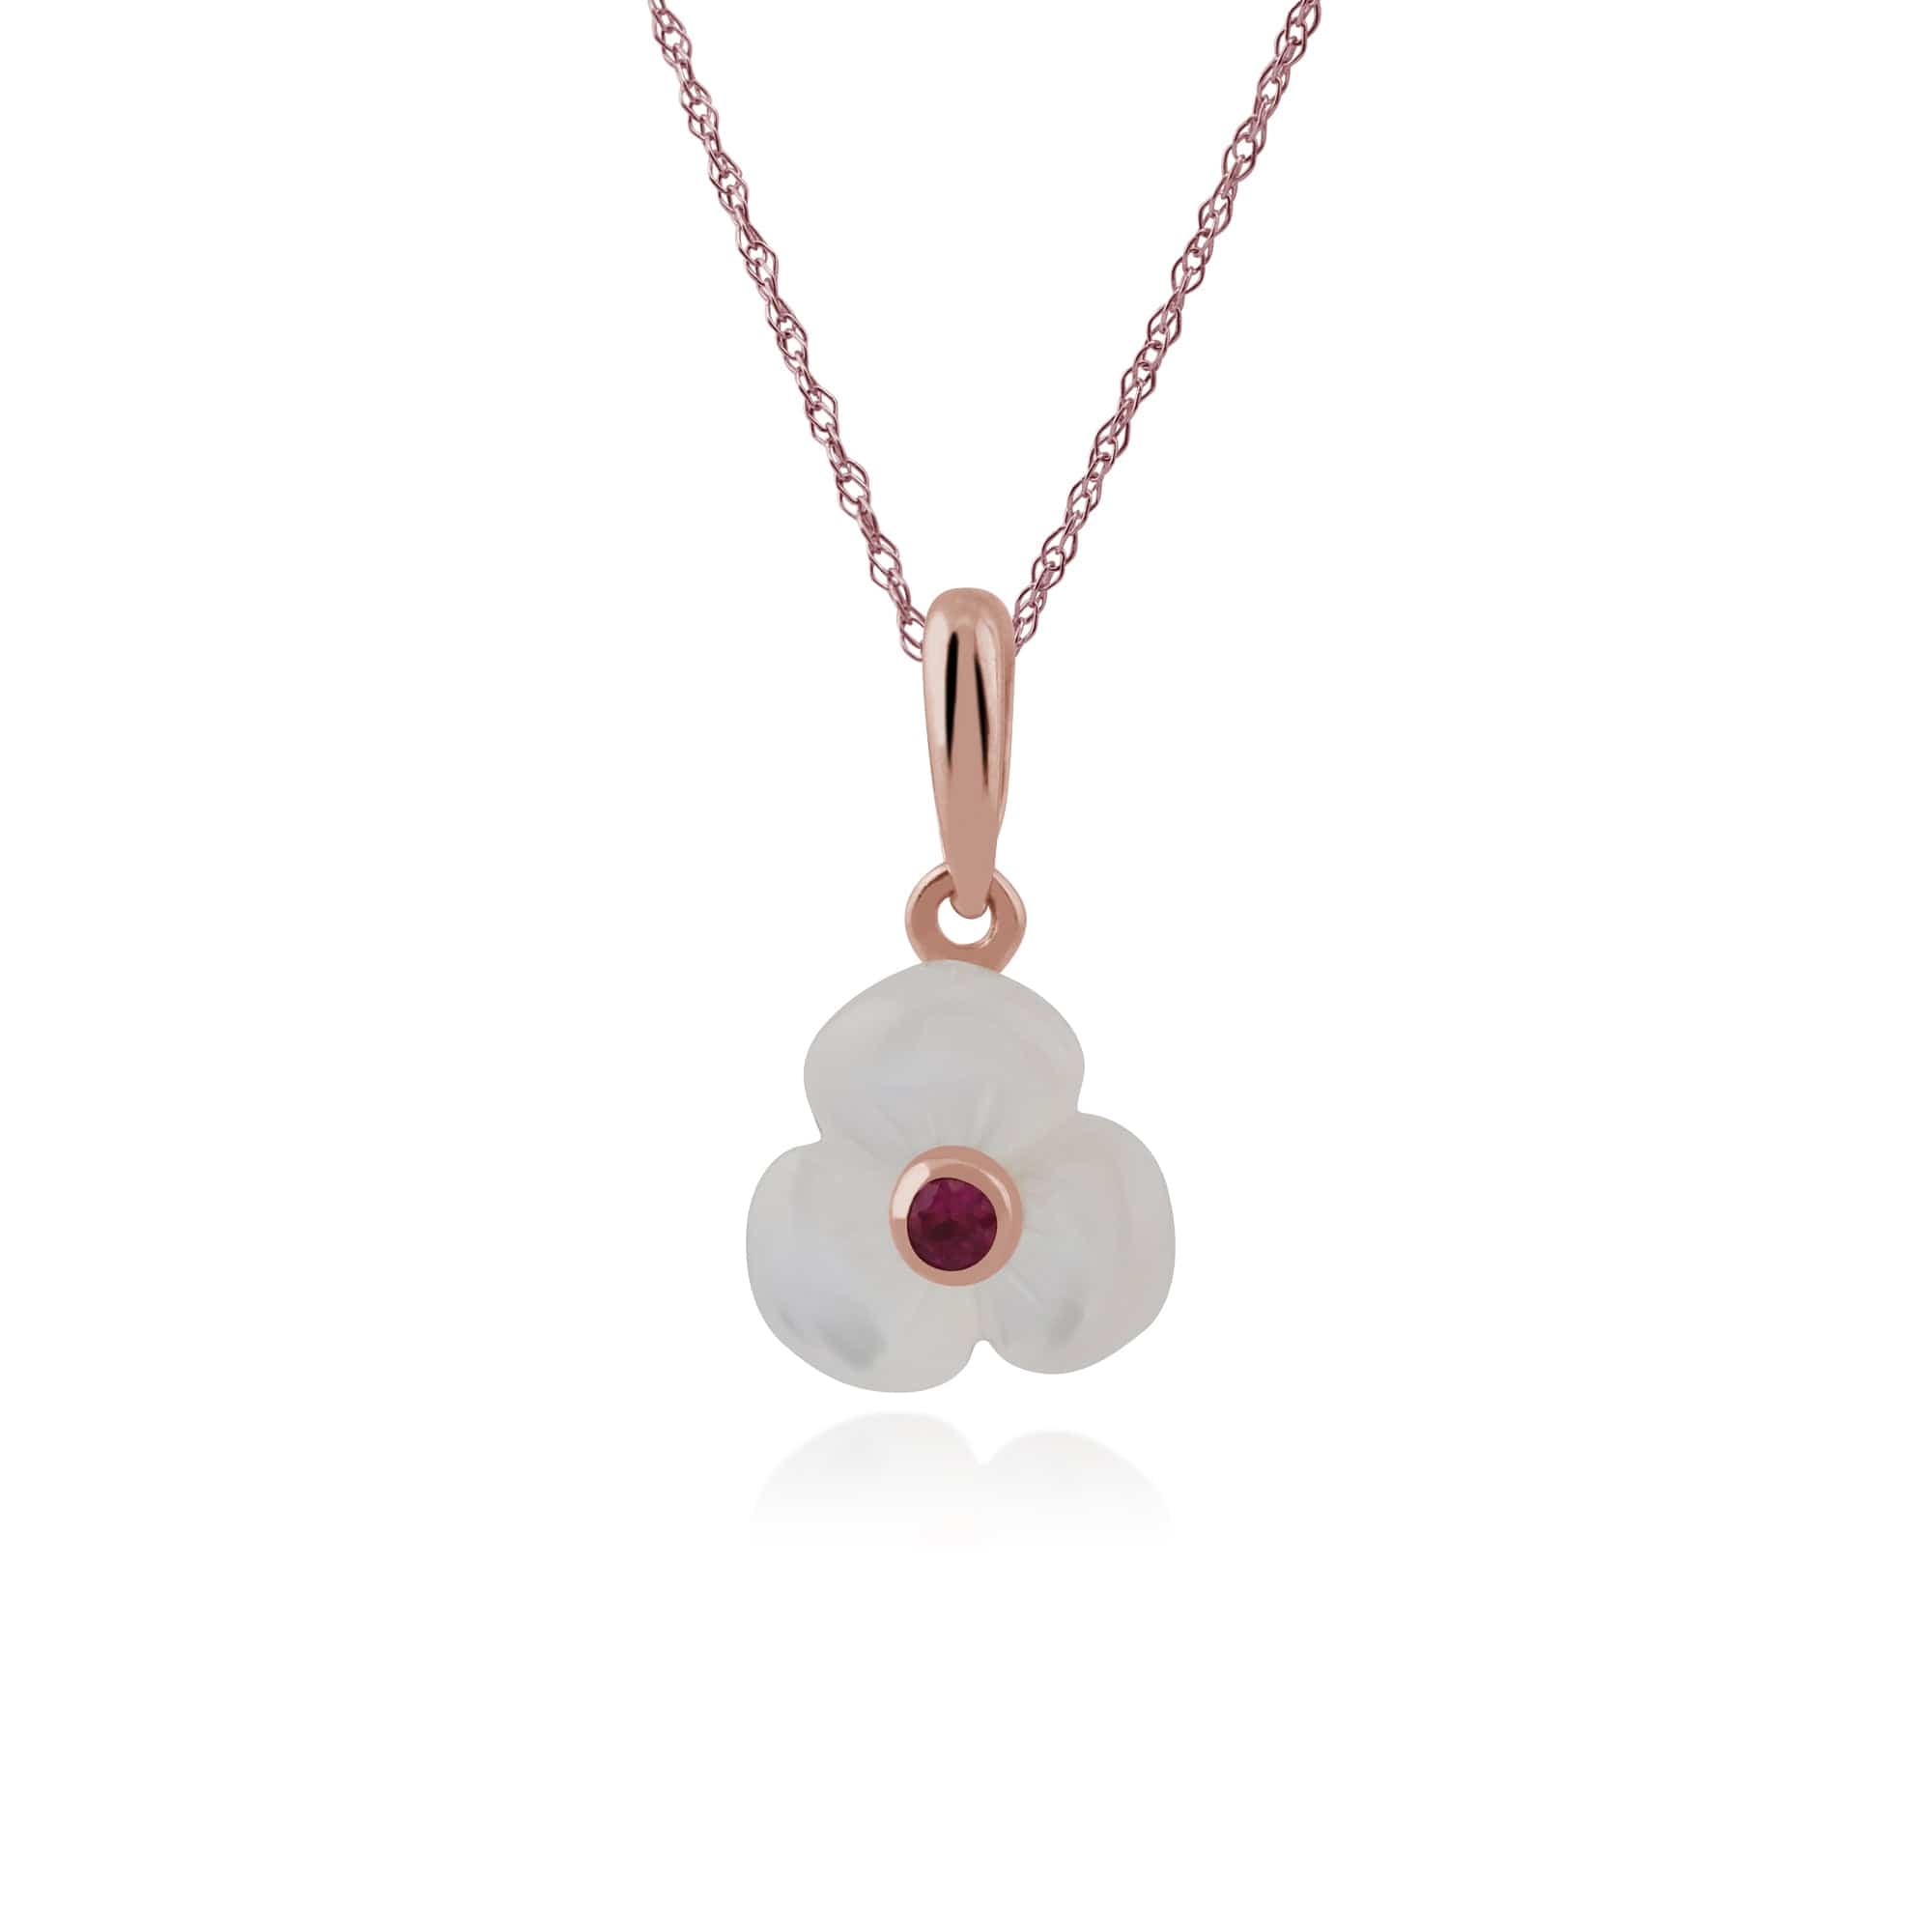 Floral Round Ruby & Mother of Pearl Daisy Pendant & Bracelet Set in Rose Gold Plated 925 Sterling Silver - Gemondo